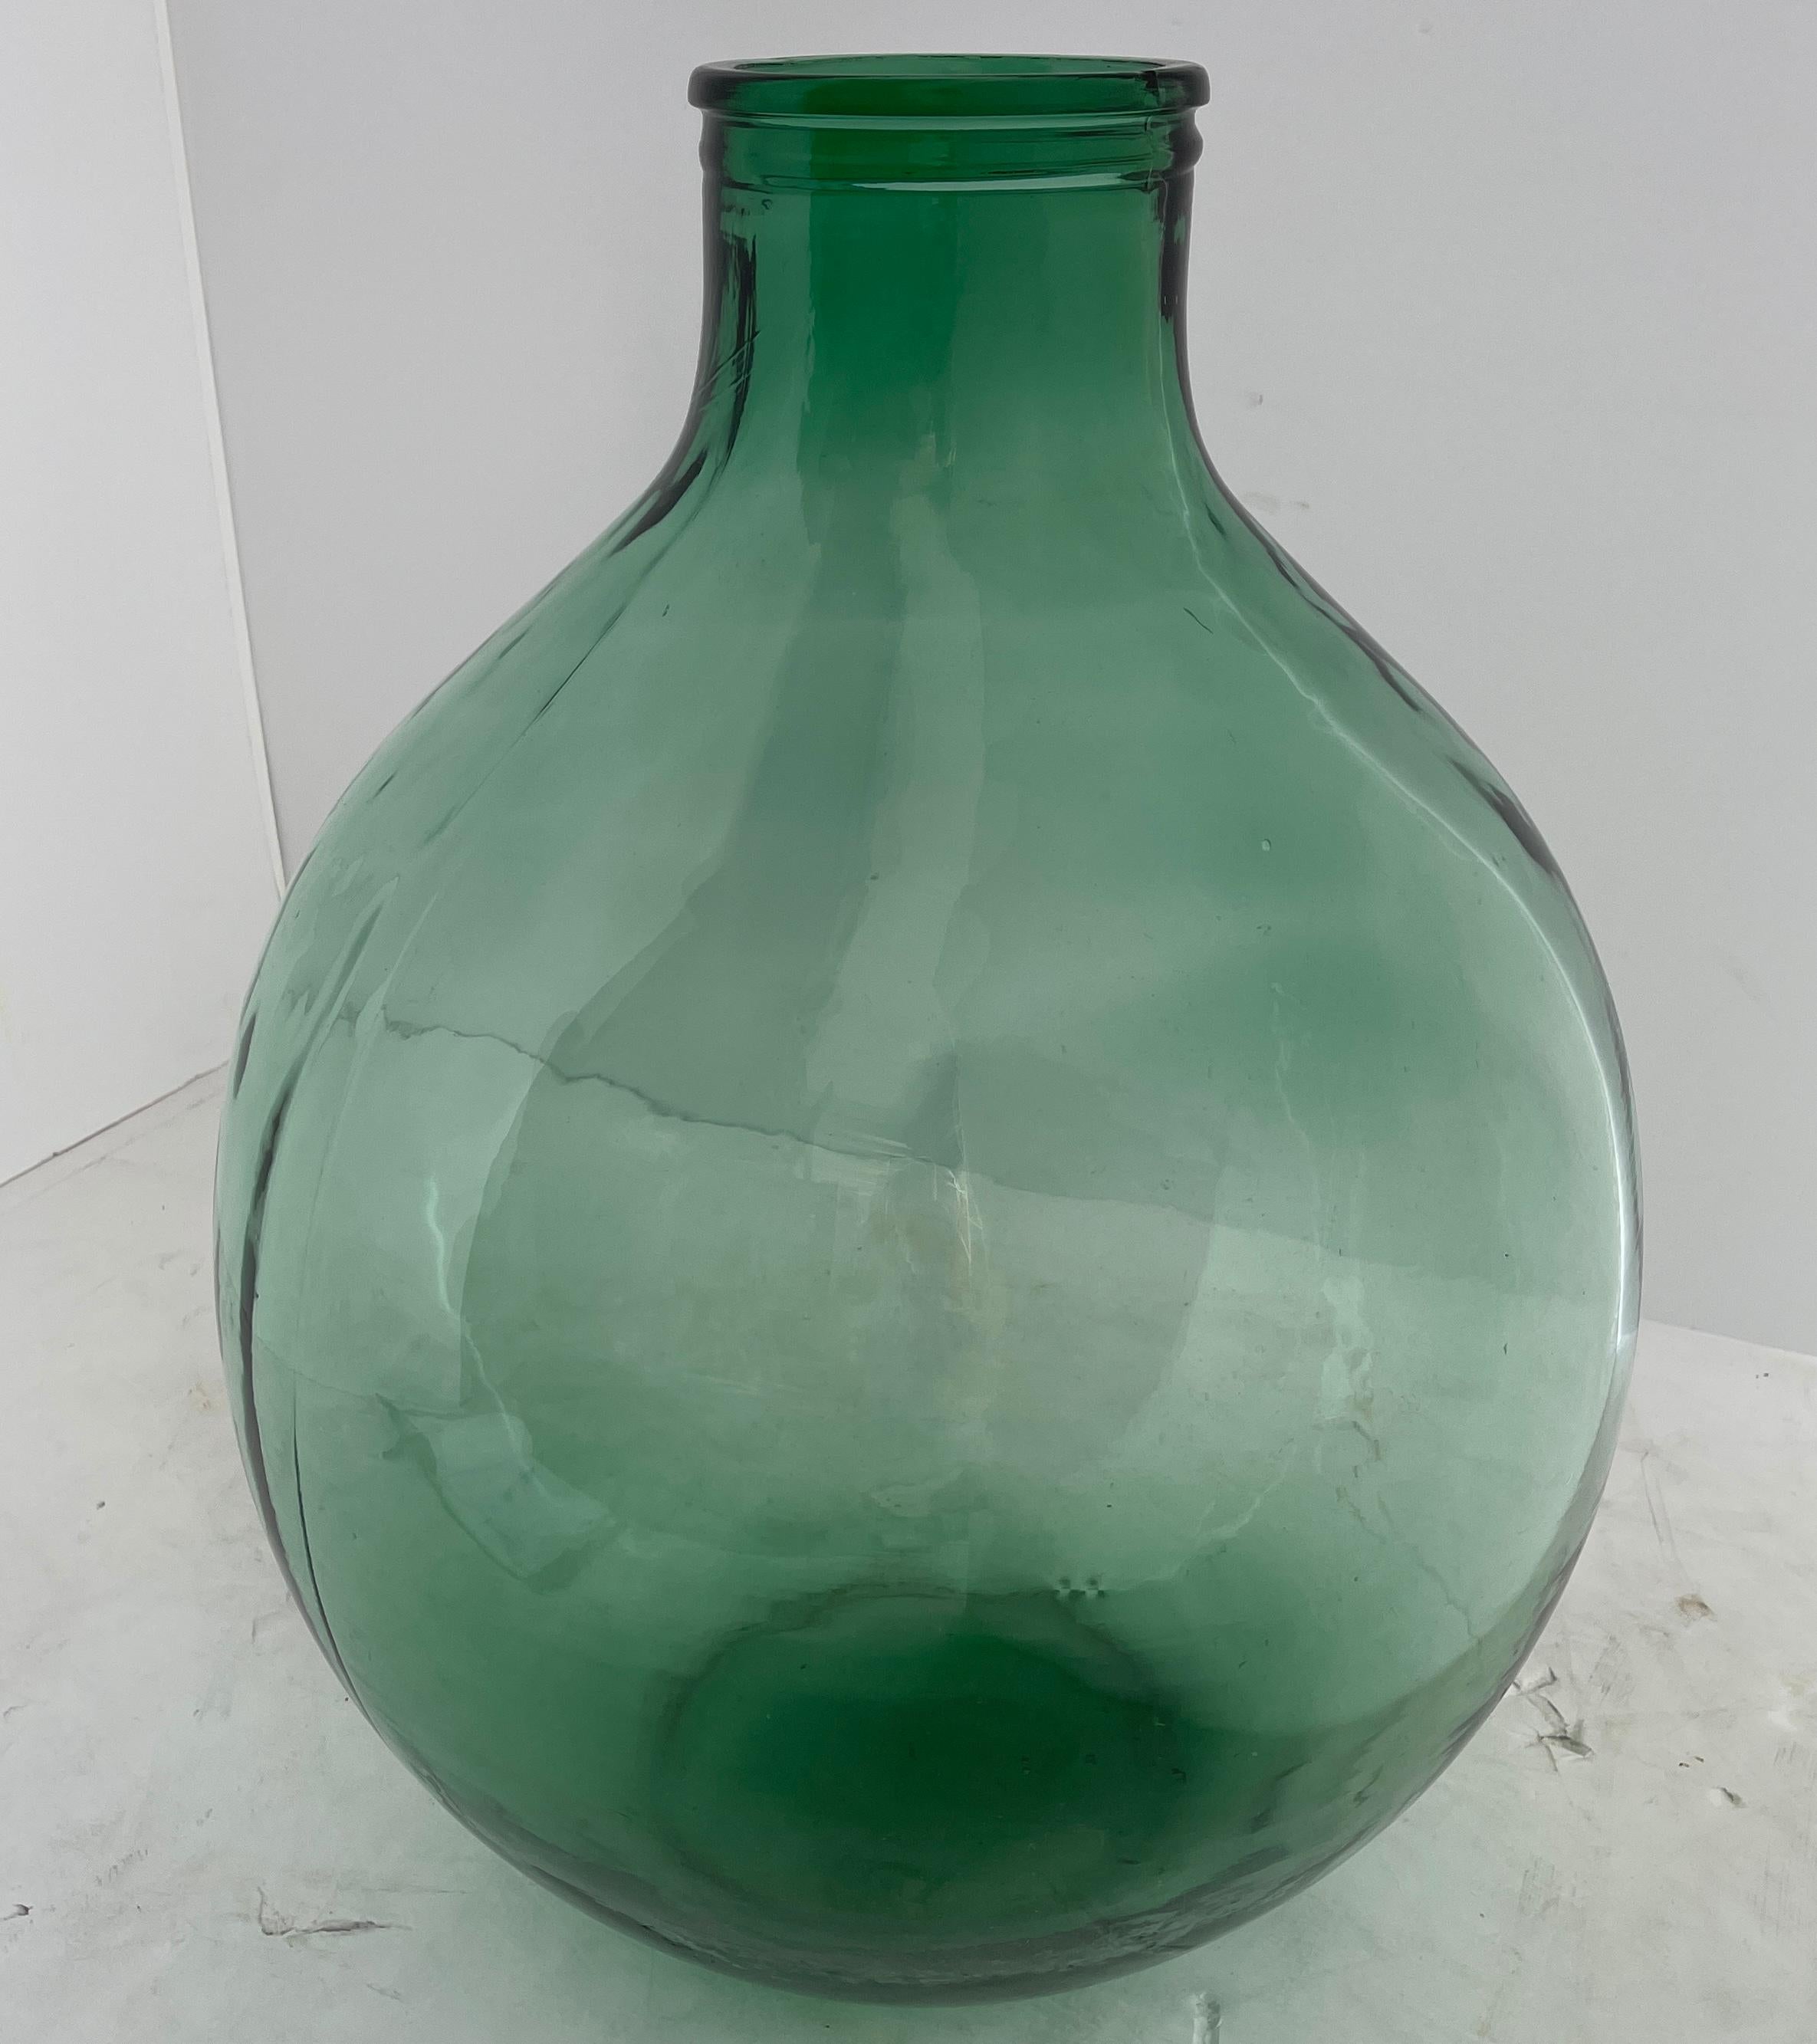 Early 1900 hundreds blown glass demijohn bottle, France.
This huge outstanding vessel is tall and sturdy. It's large mouth allows the bottle to hold a large bundle of flowers as well as an abundance of liquids. The green glass is a wonderful